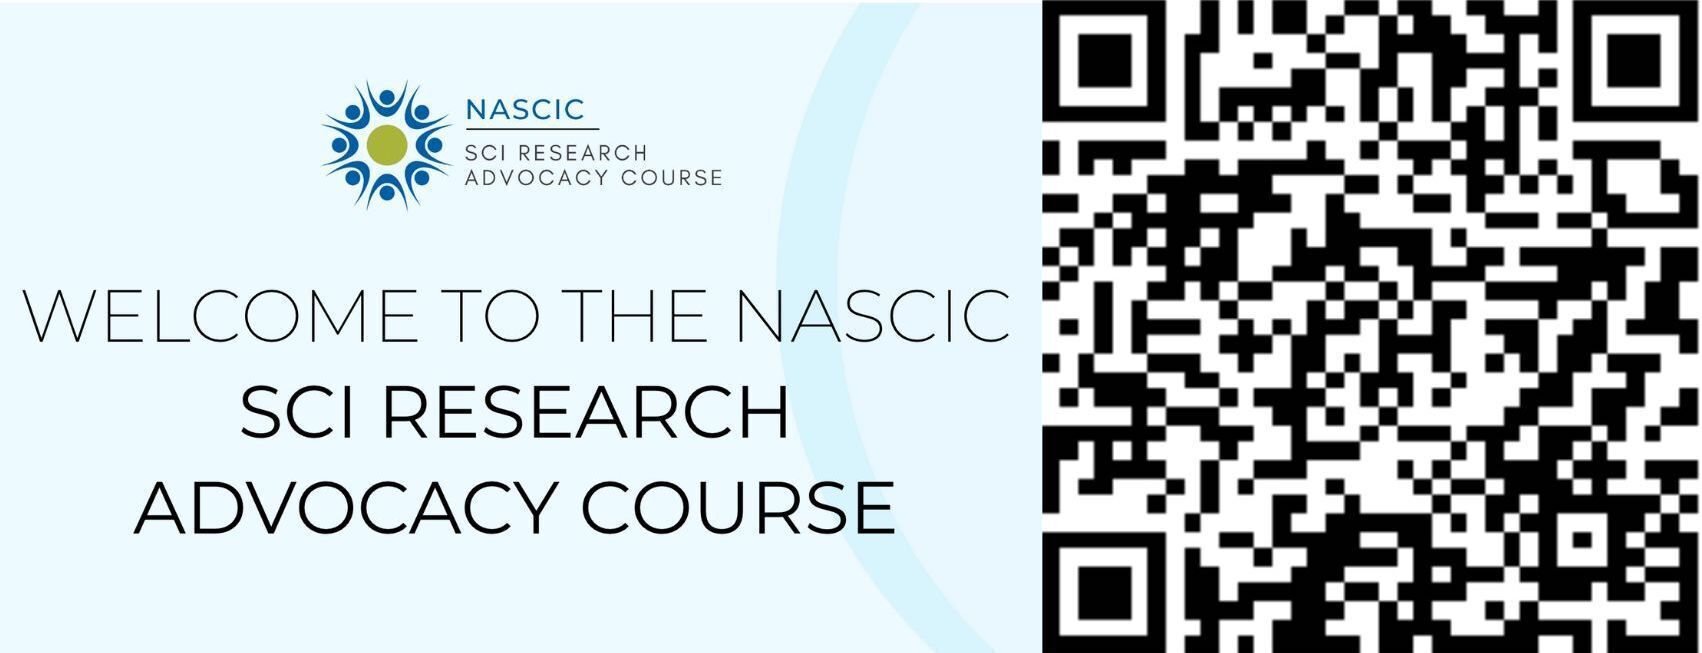 The NASCIC SCI Research Advocacy Course graphic and a QR code linking to their website.